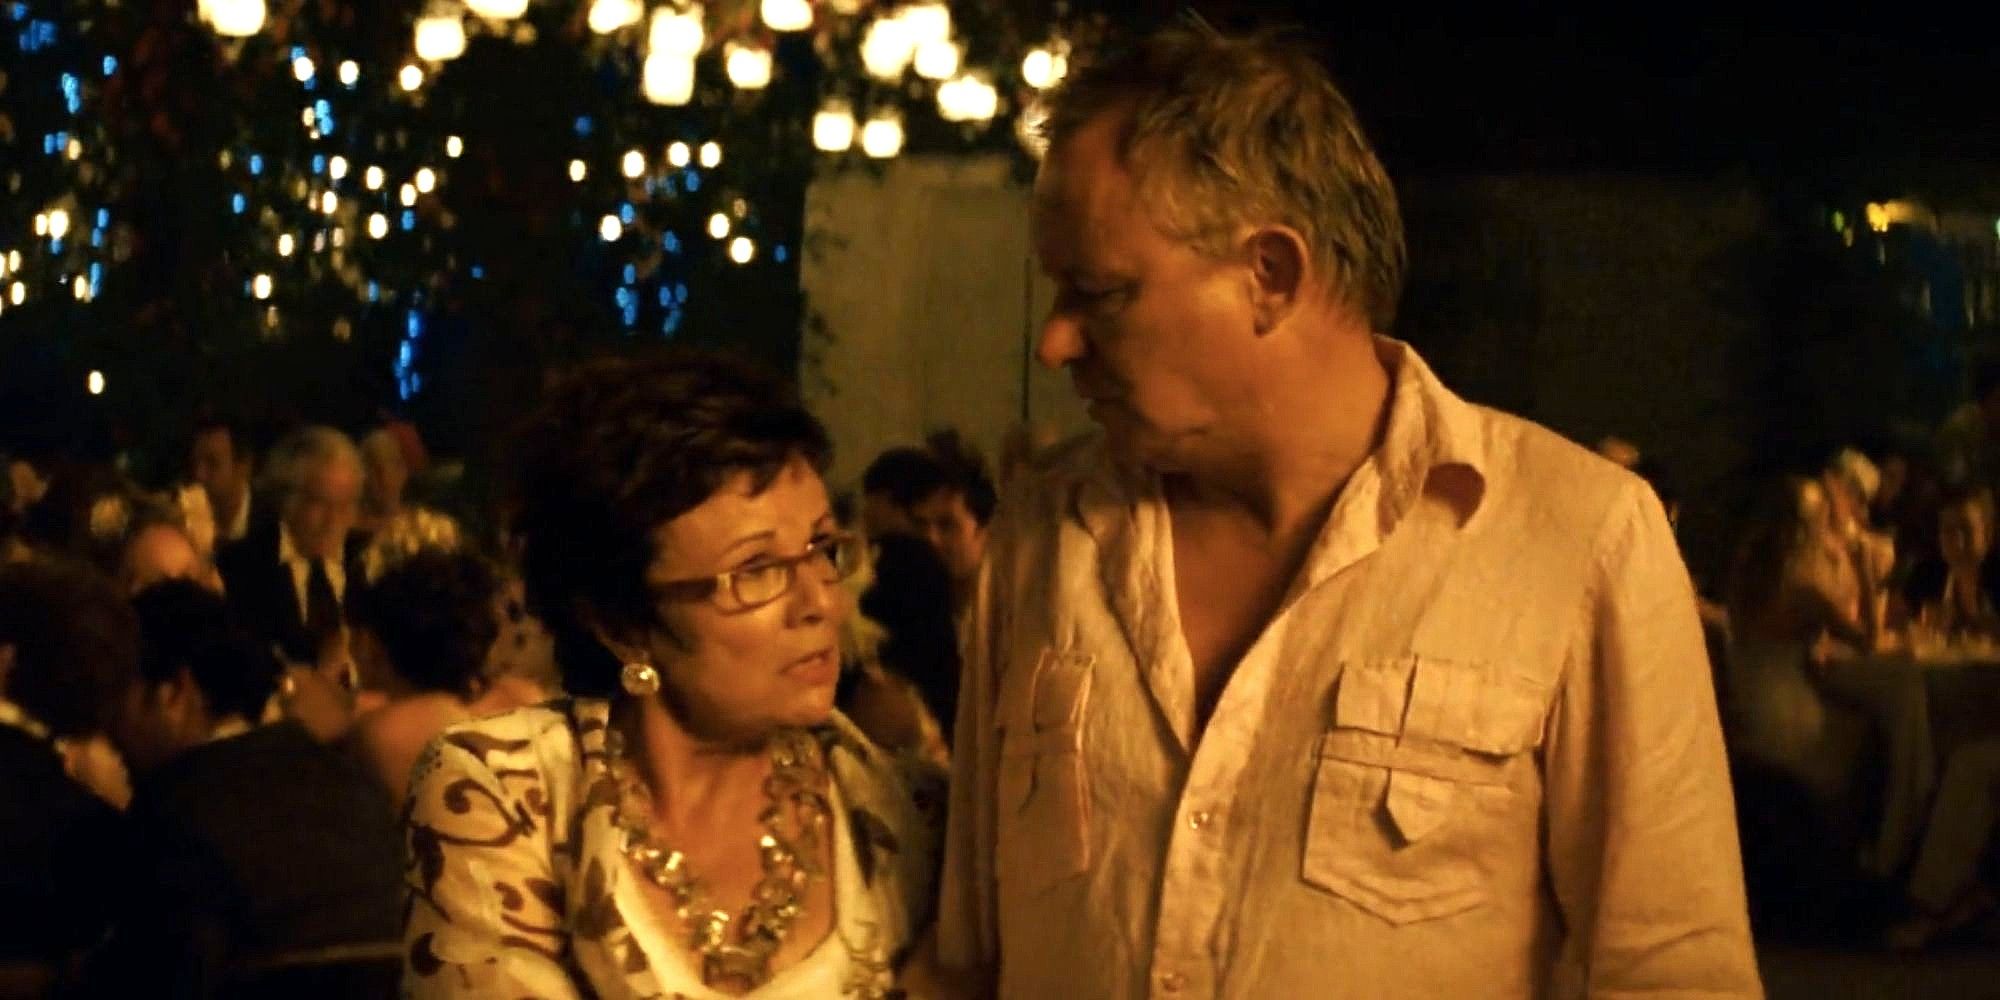 Julie Walters and Stellan Skarsgård singing Take A Chance On Me in Mamma Mia!